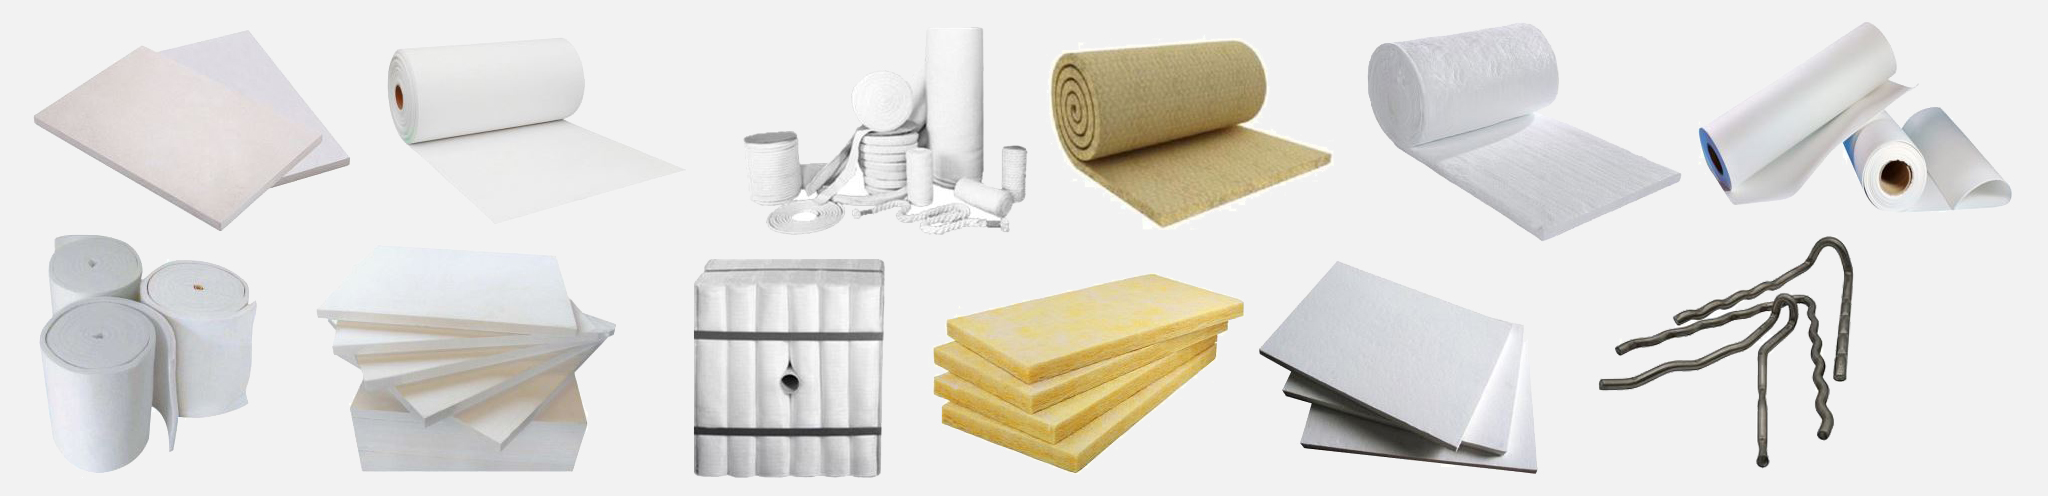 Insulation-thermal-Material